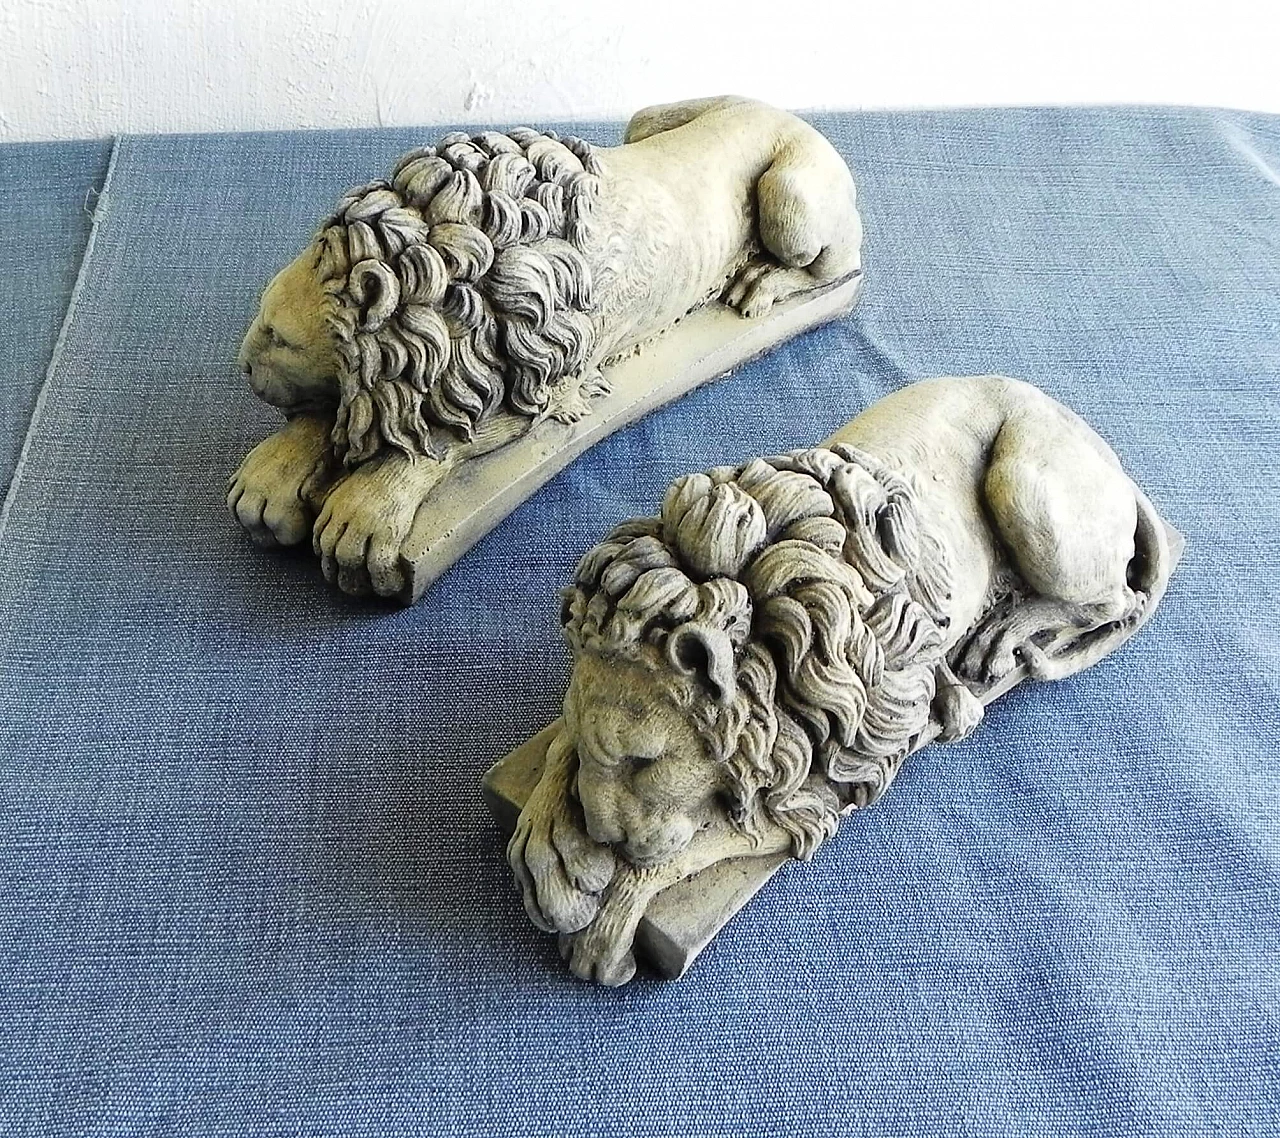 Pair of stone sculptures of sleeping lions 14